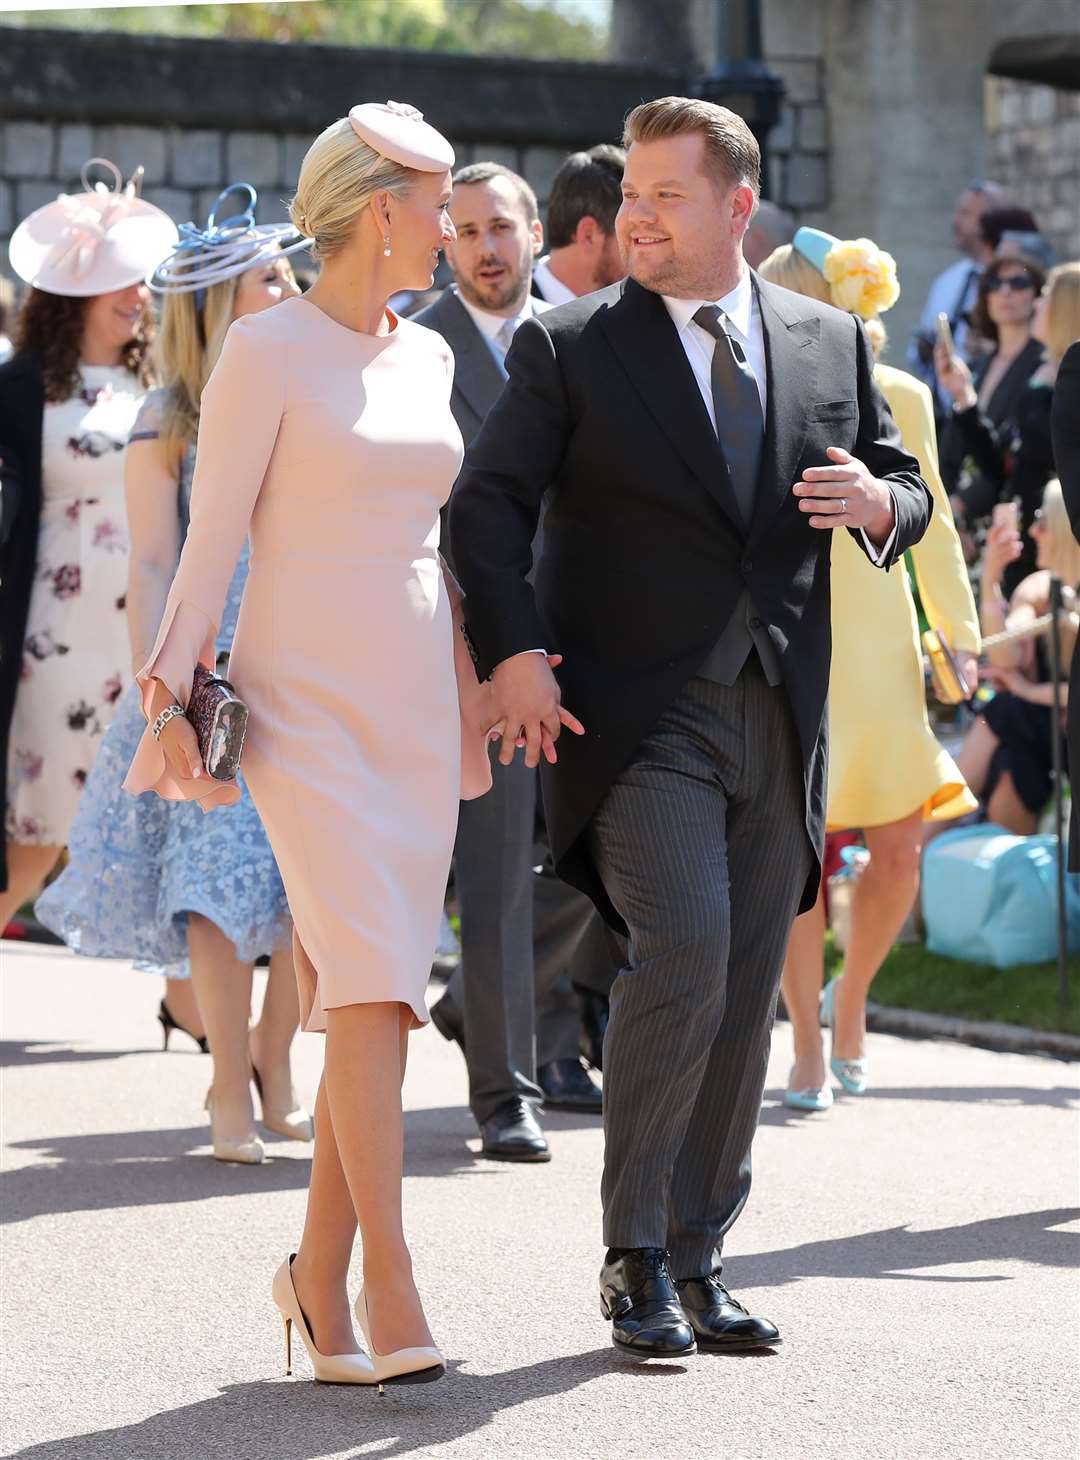 James Corden and wife Julia Carey attending Harry and Meghan’s wedding (Gareth Fuller/PA)